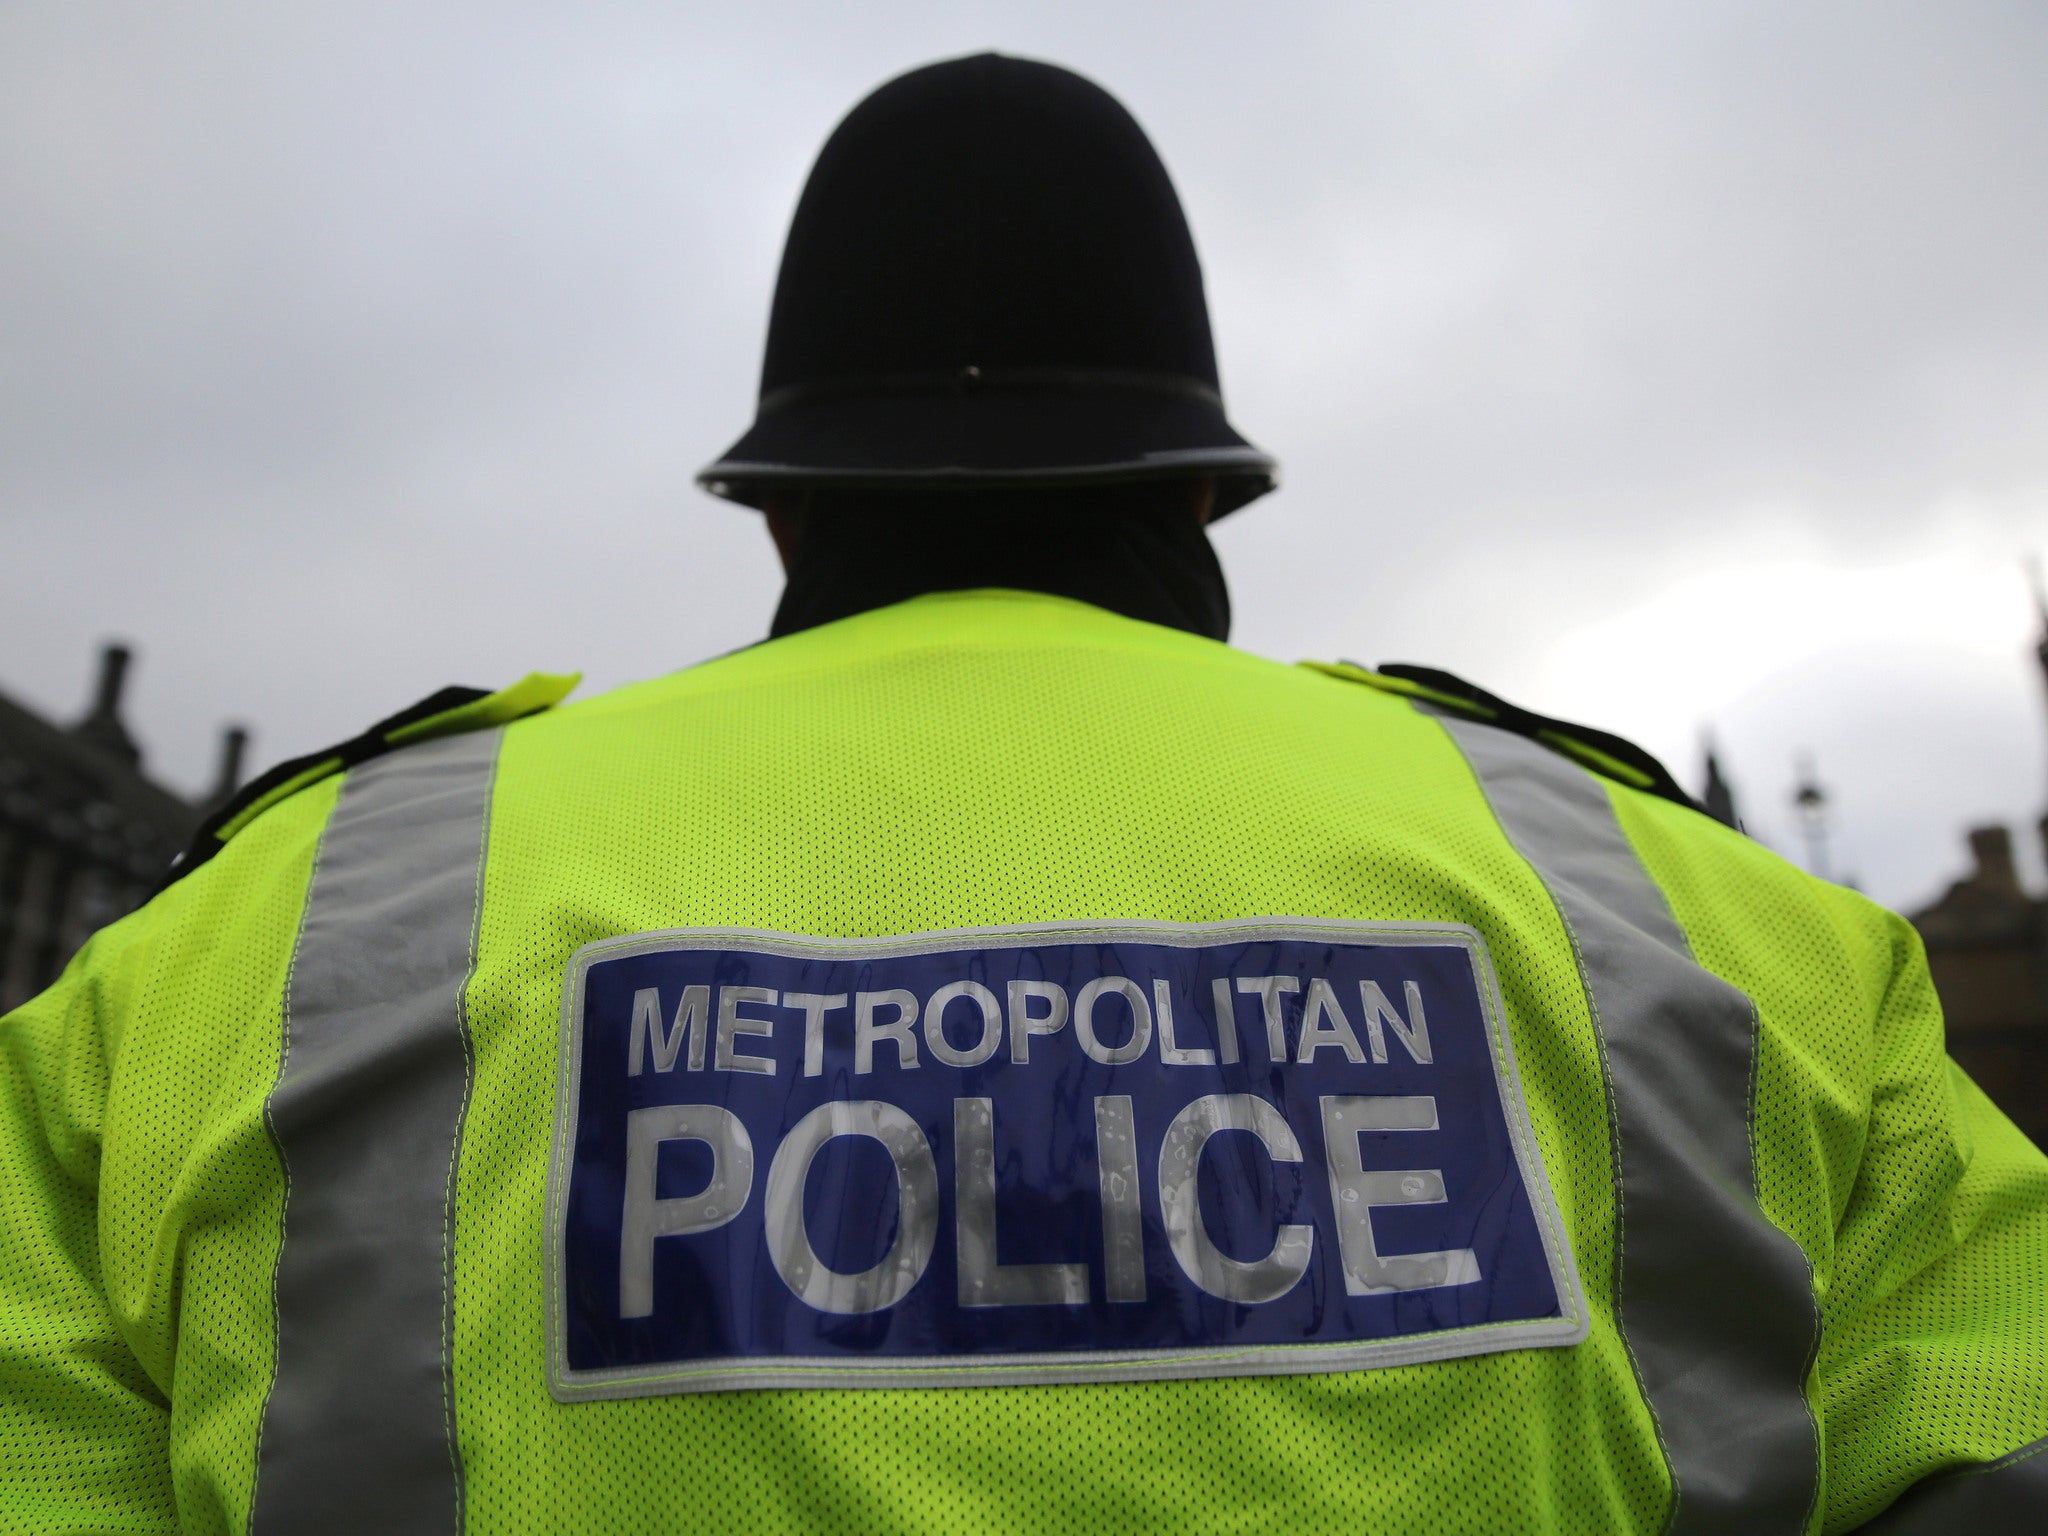 The Met Police were called to Islington in the early hours of this morning